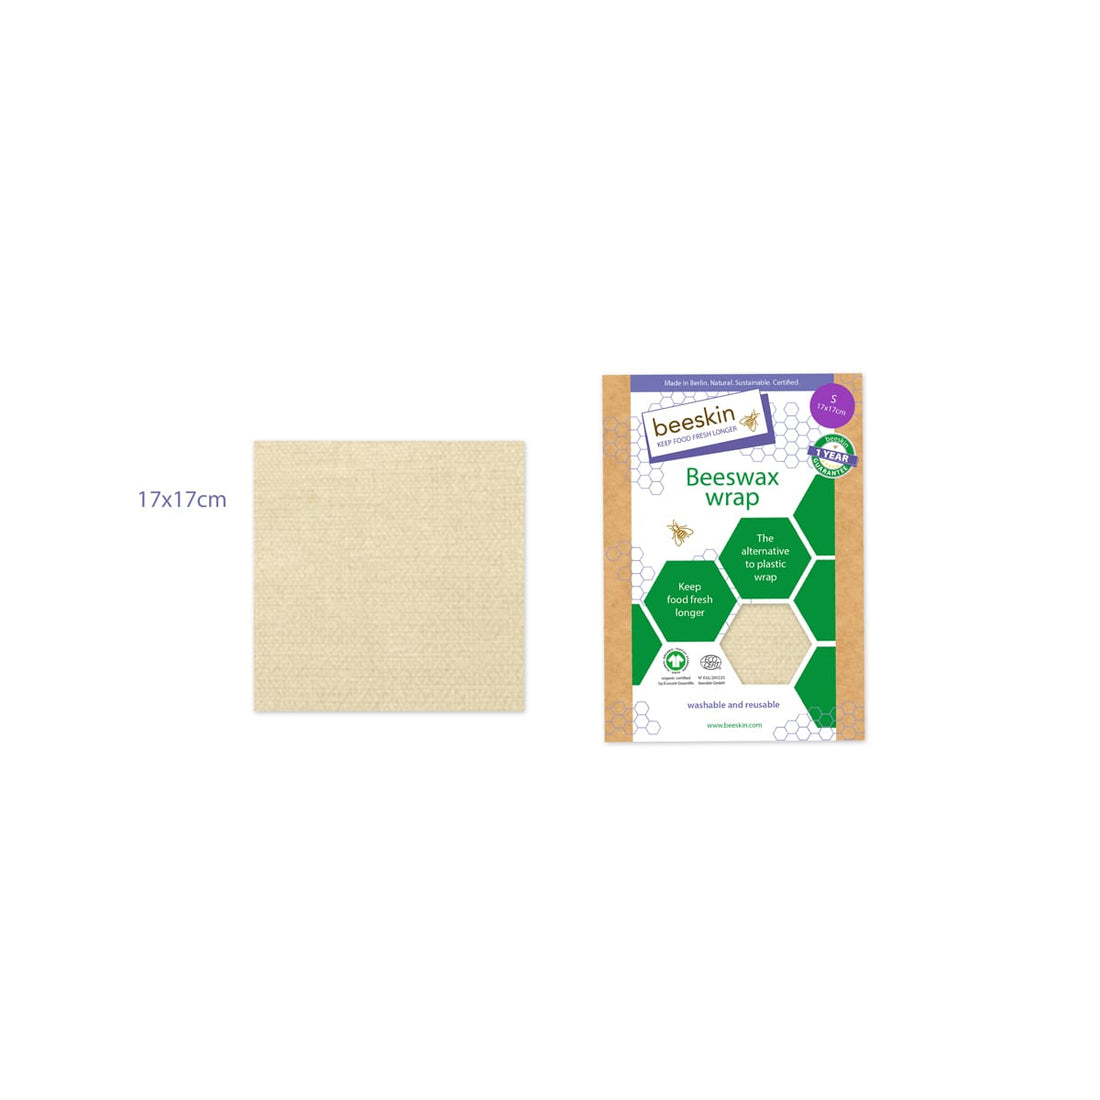 beeskin beeswax wrap s natural next to packaging